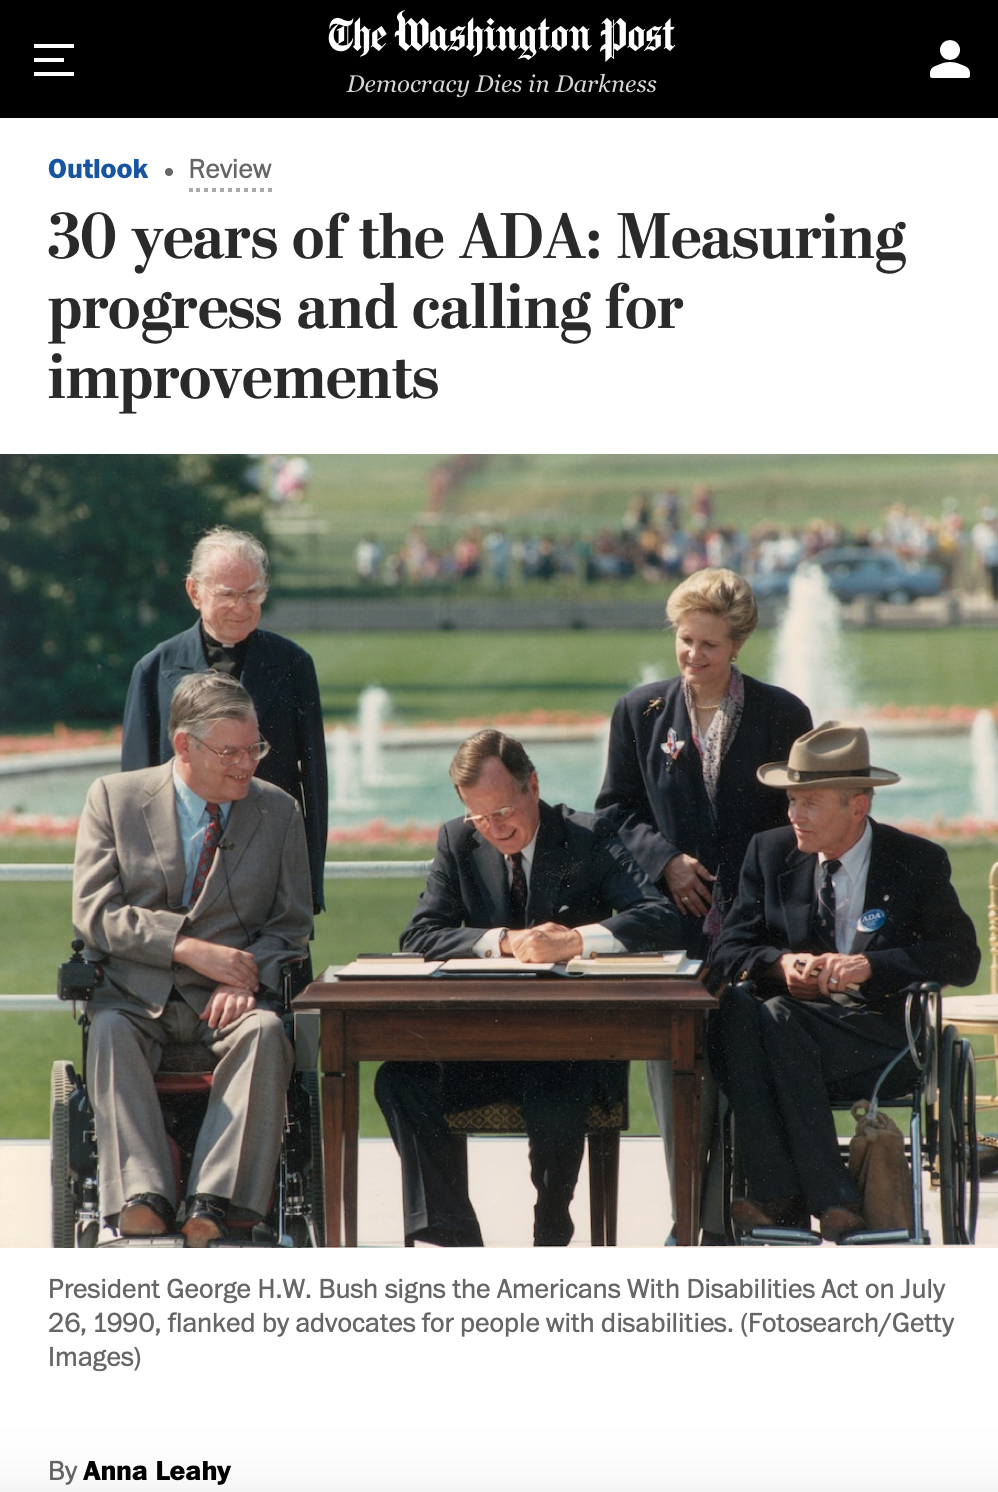 The Washington Post, 30 Years of the ADA, with photo of President George Bush and four others at table for bill signing